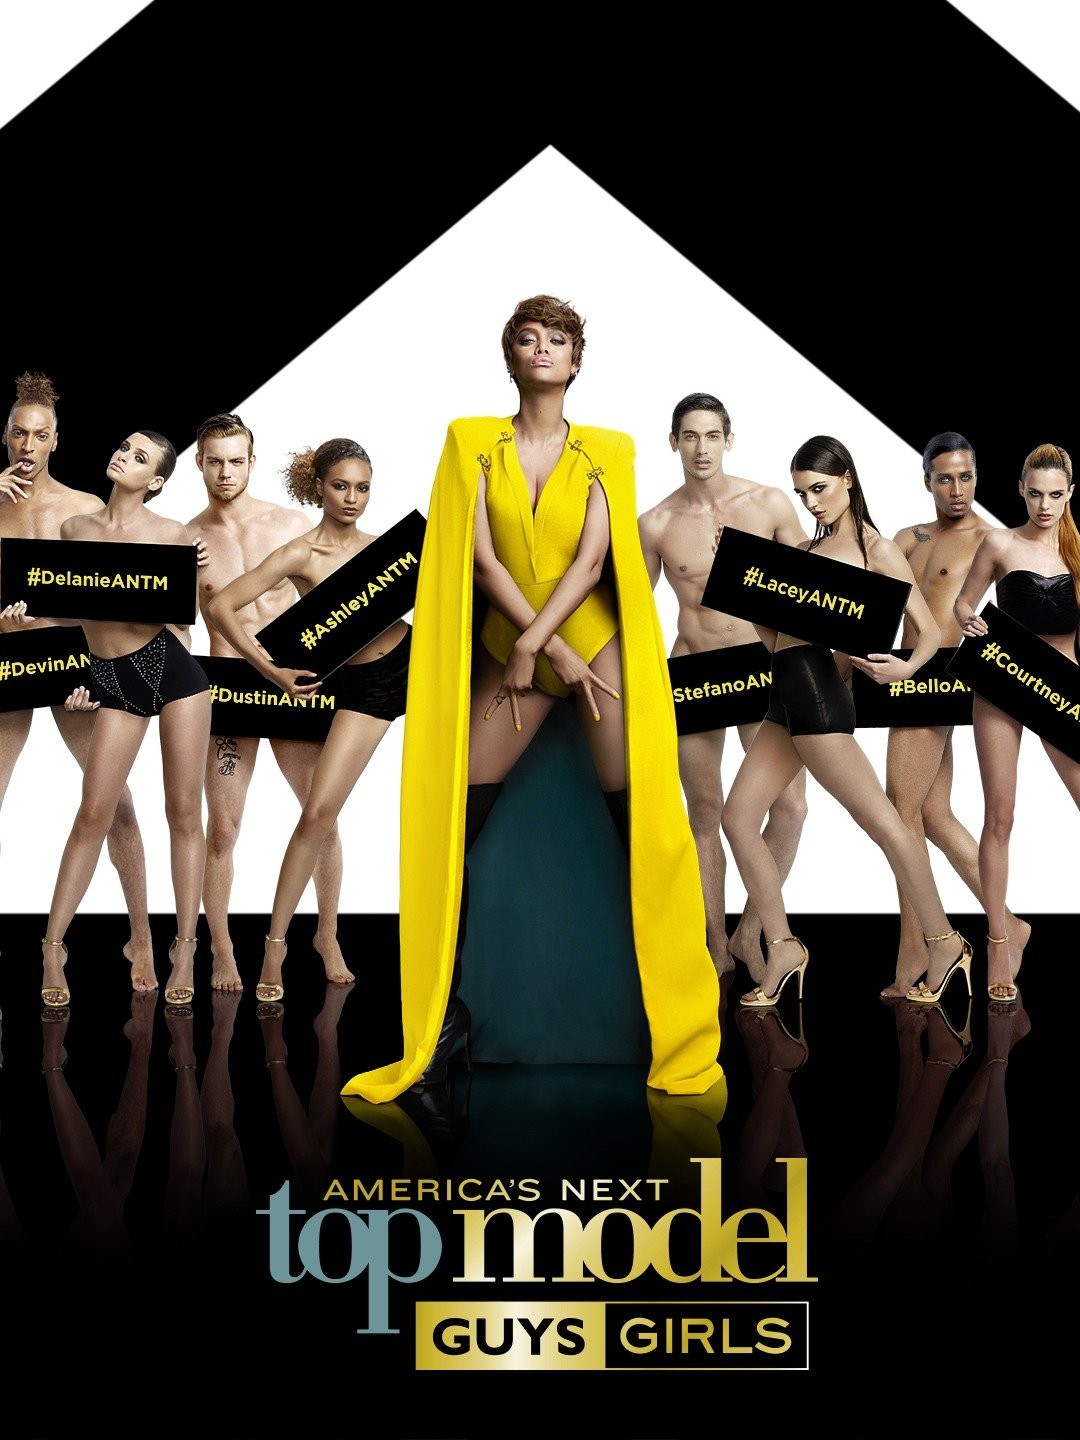 Where can I watch Korea's Next Top Model? : r/ANTM